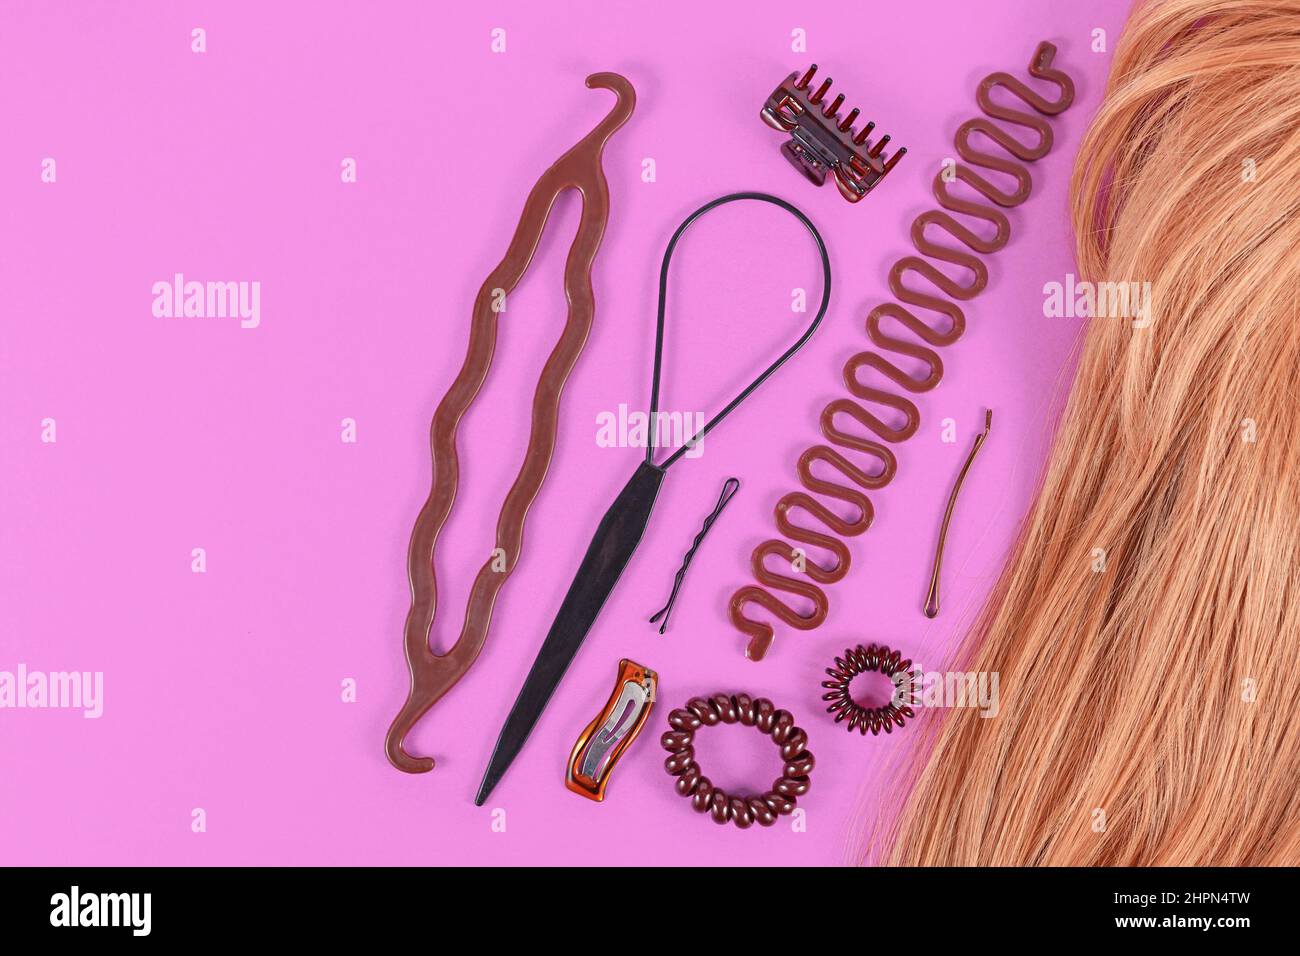 Set of hair styling tools like bun maker, braid tool, ponytail style maker, hair clip, rubber bands and pins next to blond hair with copy space Stock Photo